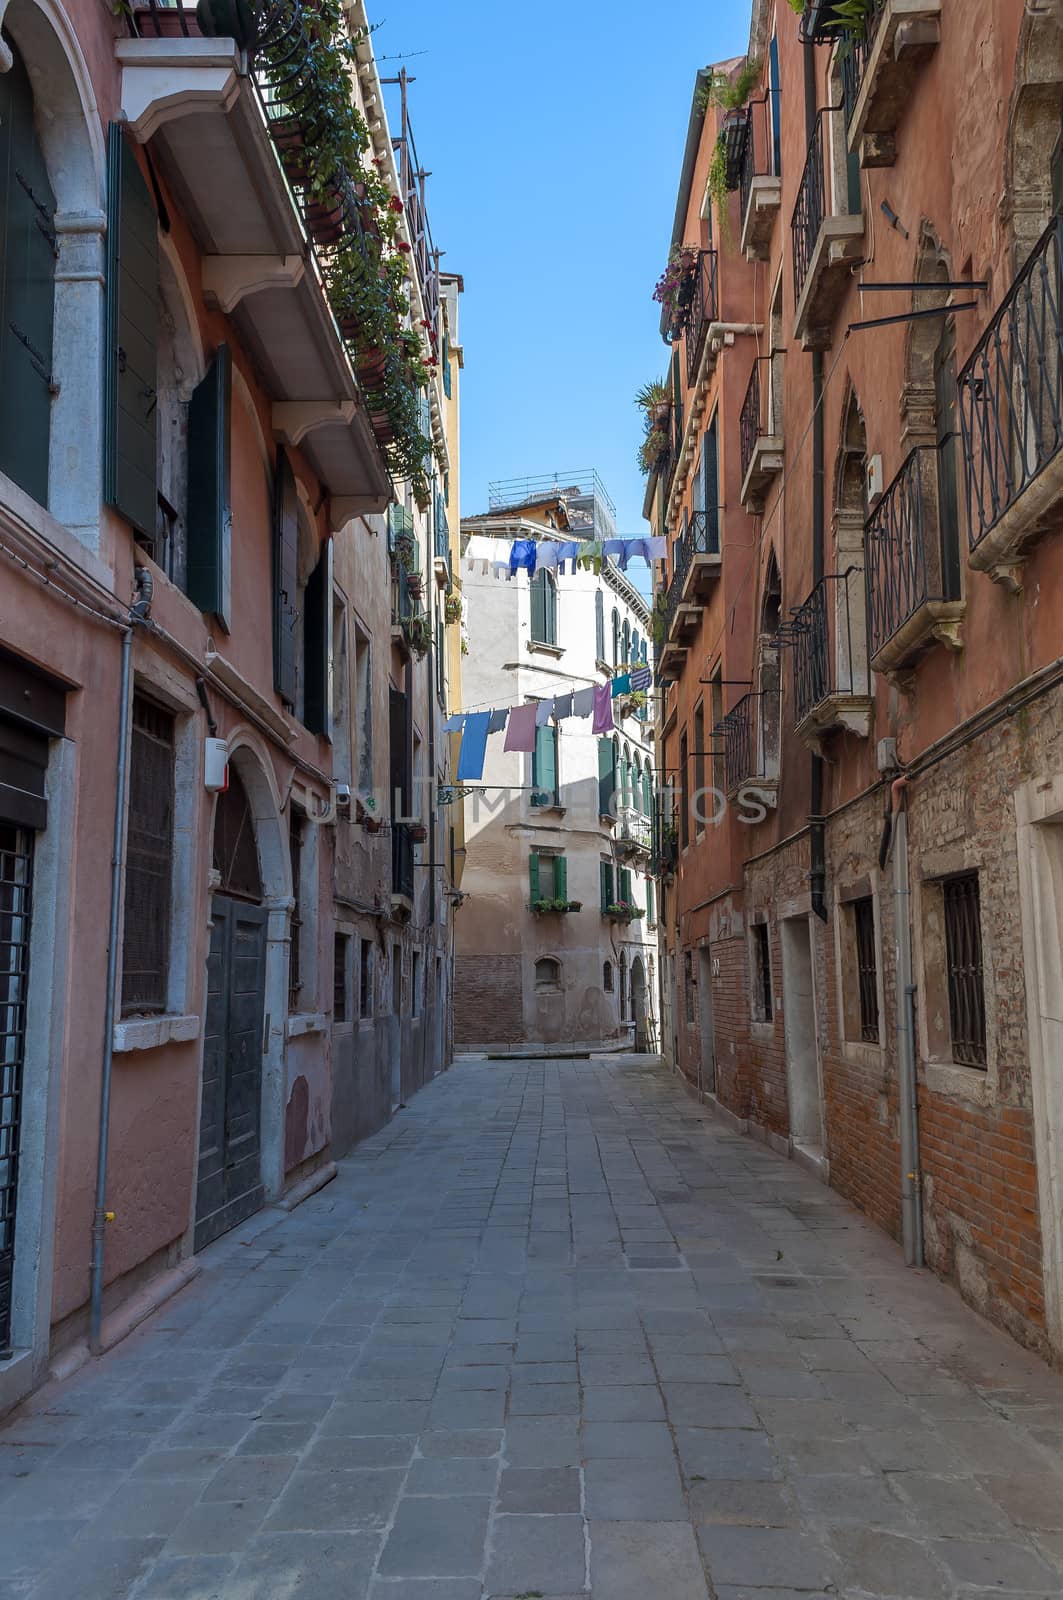 Residential buildings along quiet street in Venice, Italy.